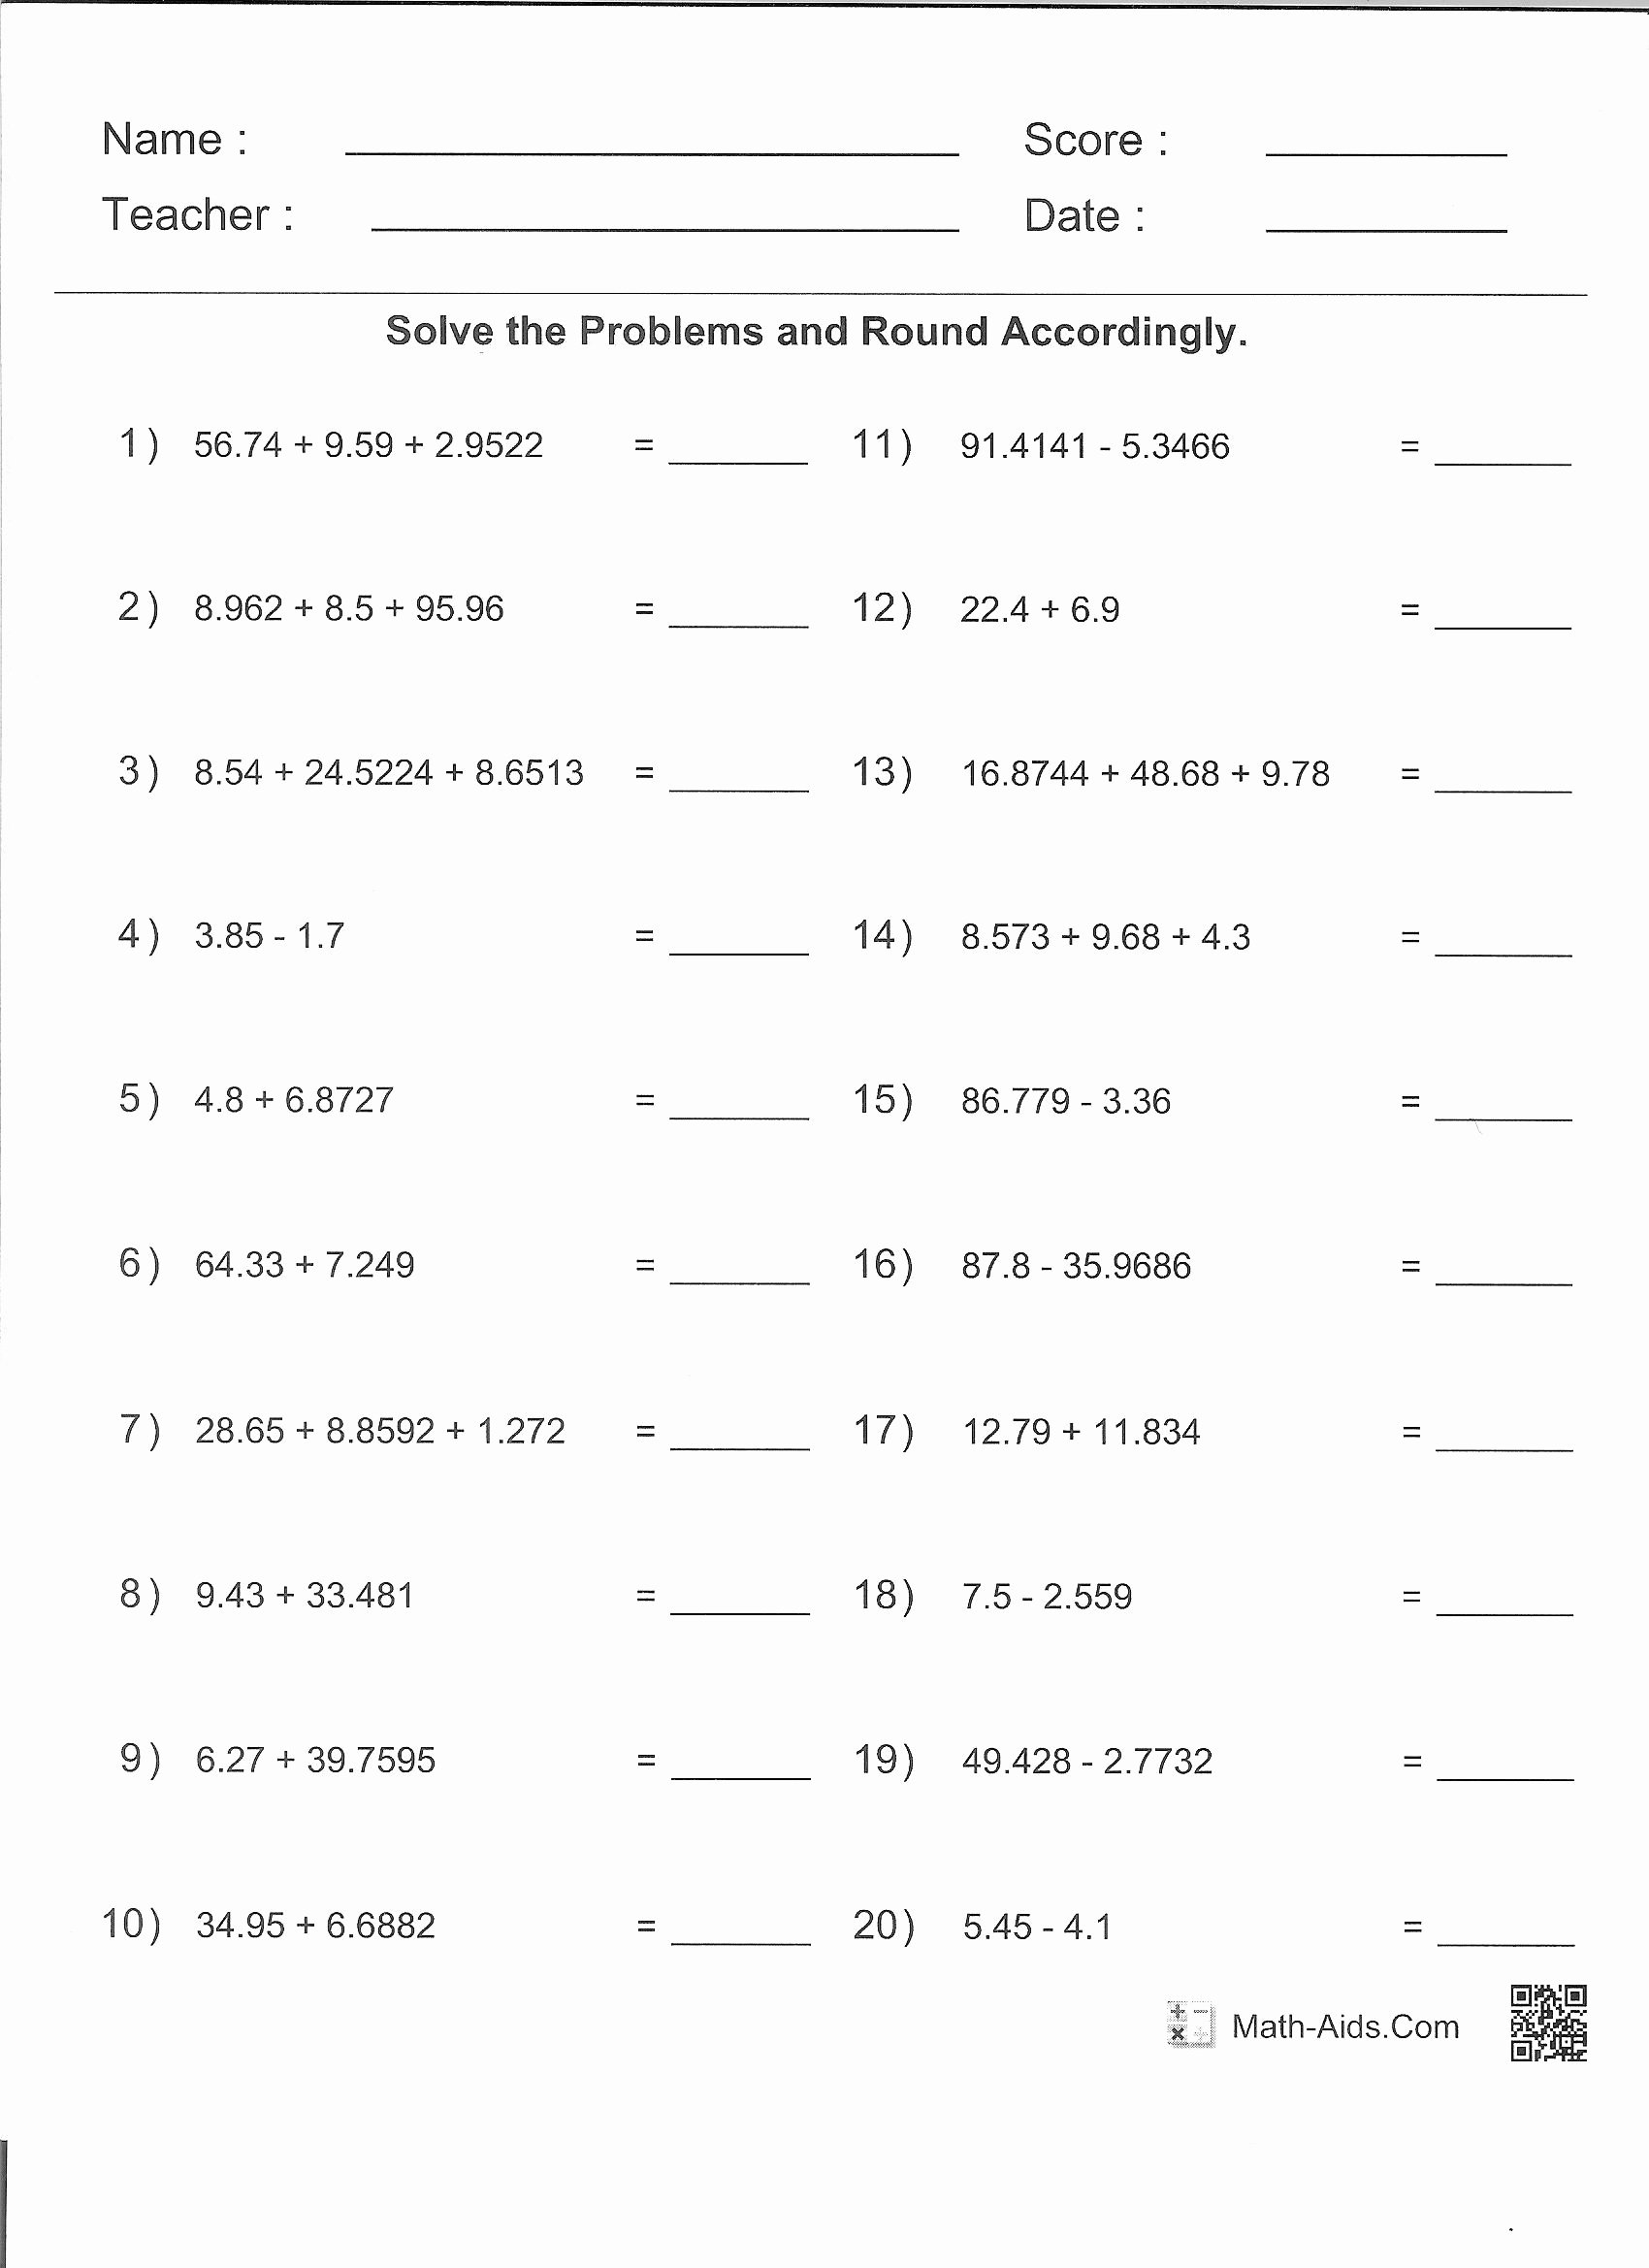 Sig Figs Worksheet with Answers Unique Significant Figures Bined Operations Worksheet